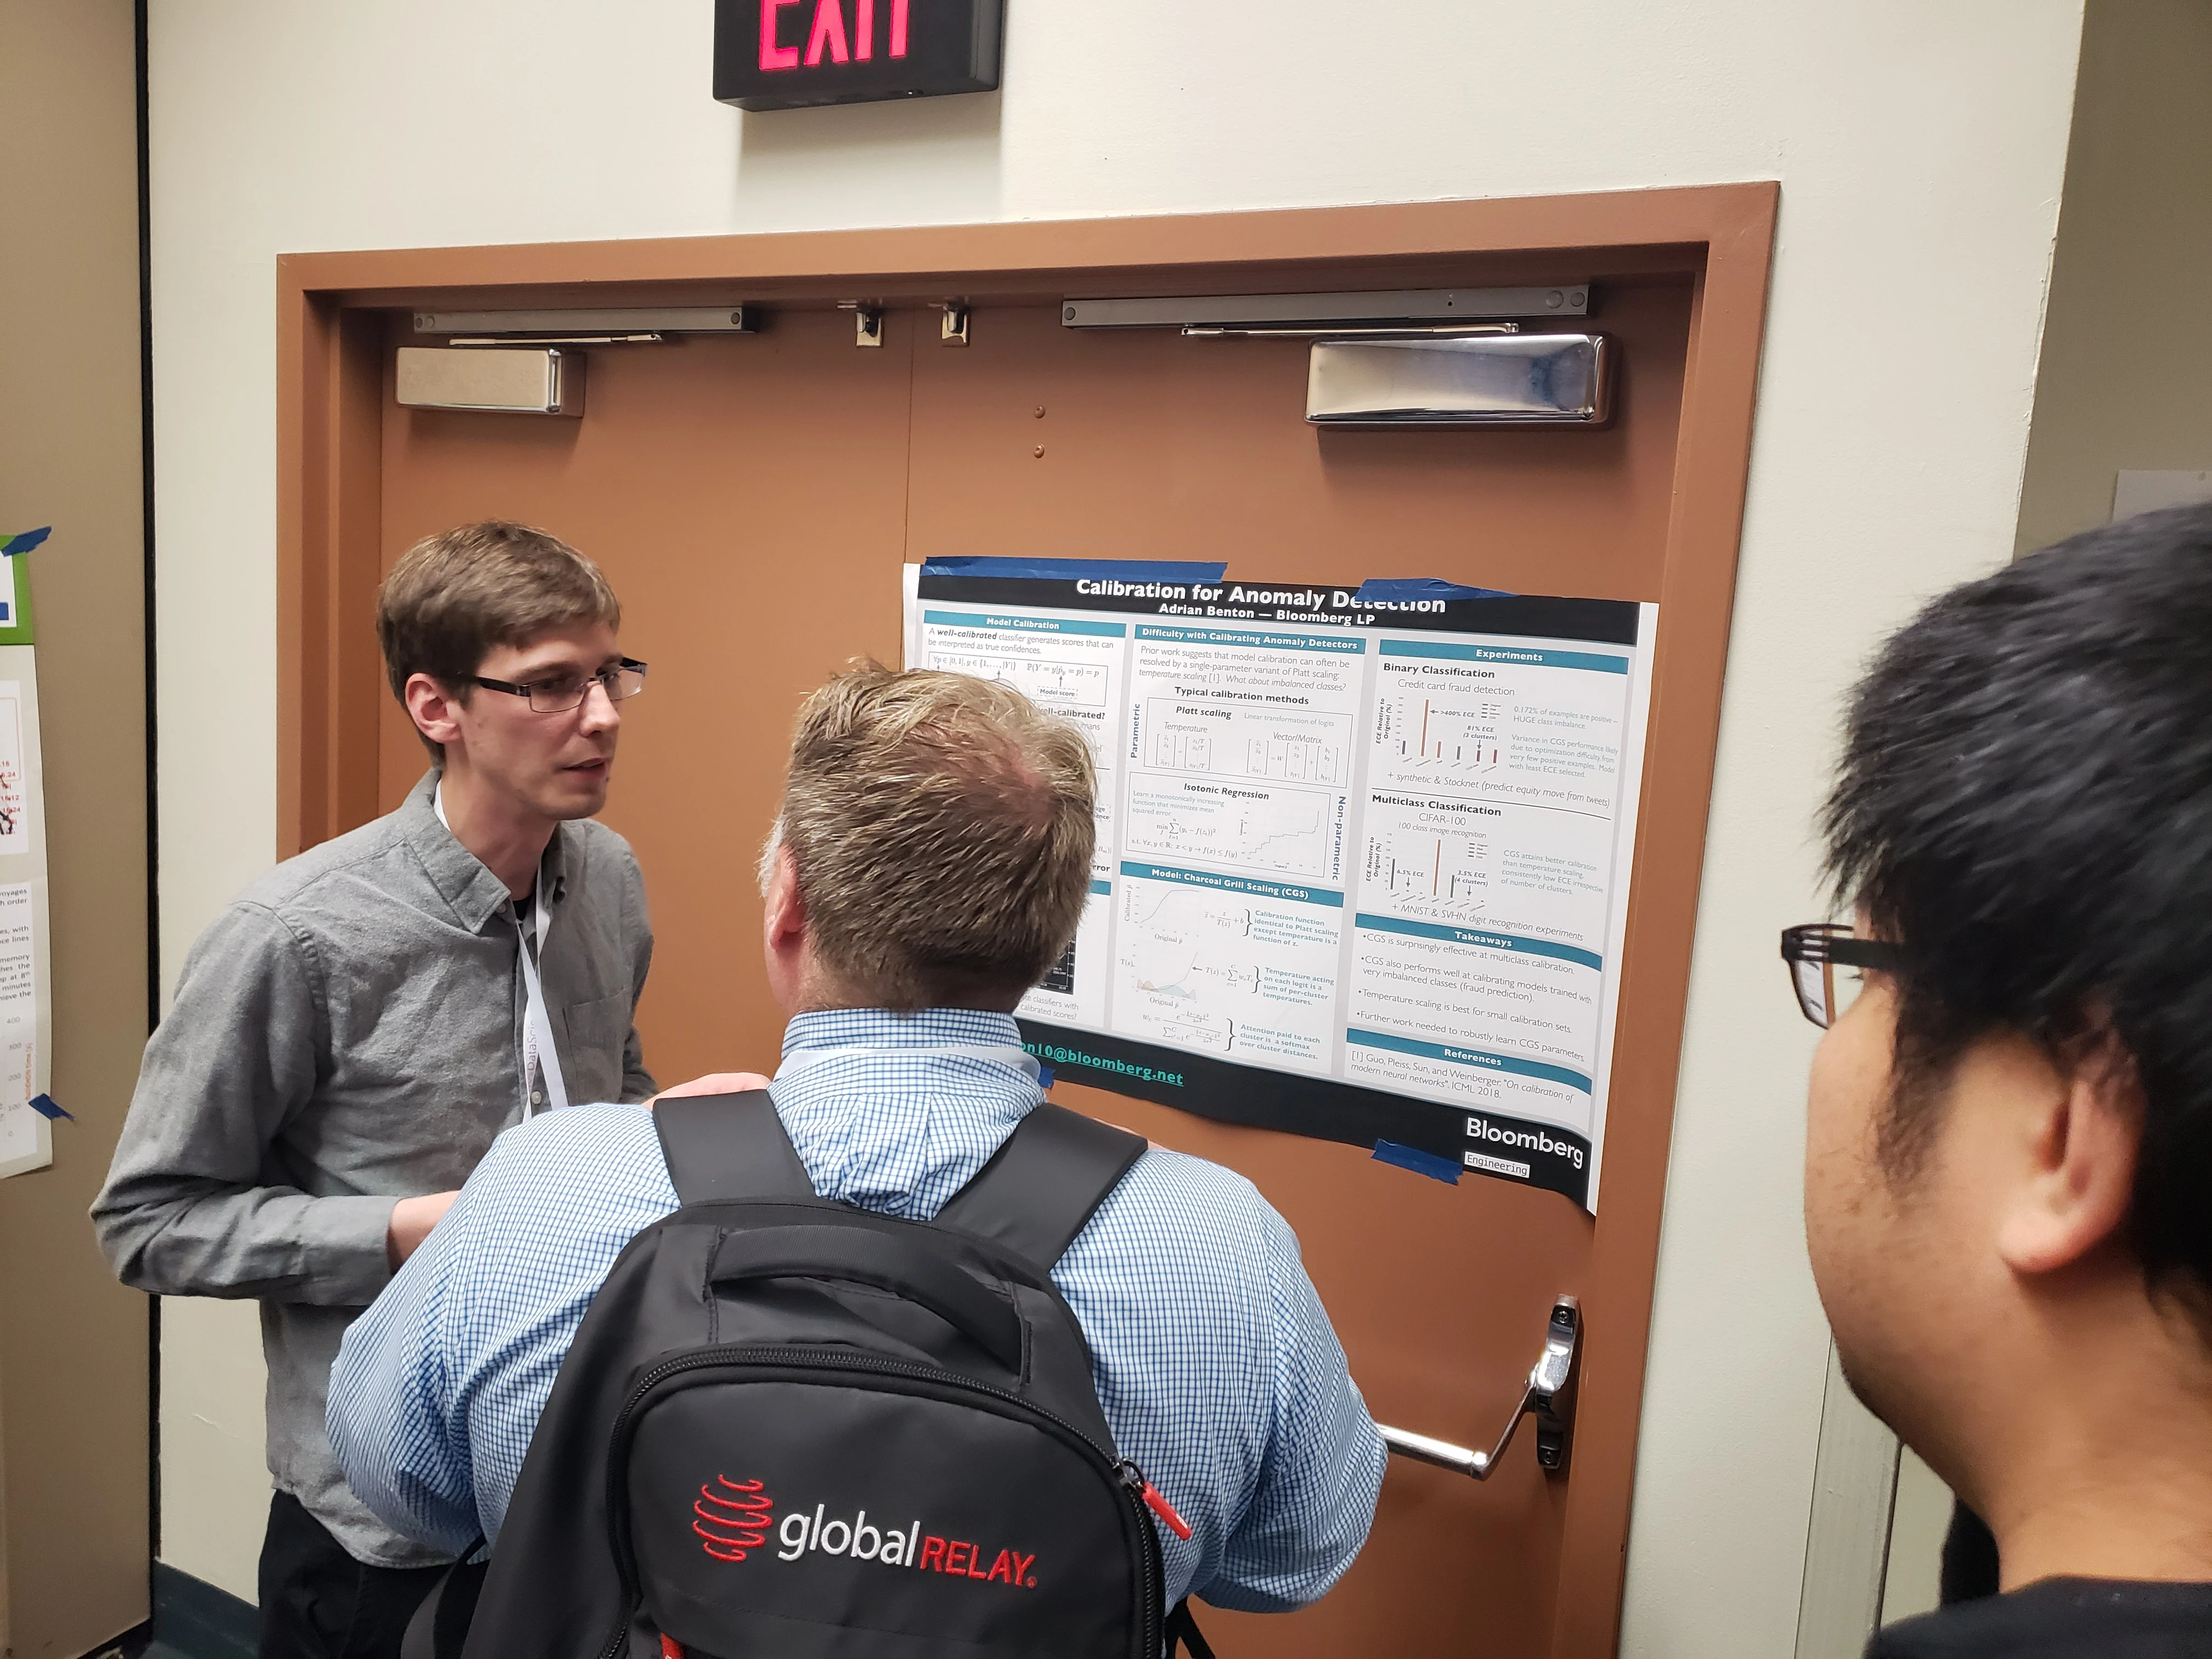 Senior Research Scientist Adrian Benton talks with workshop attendees about his “Calibration for Anomaly Detection" research